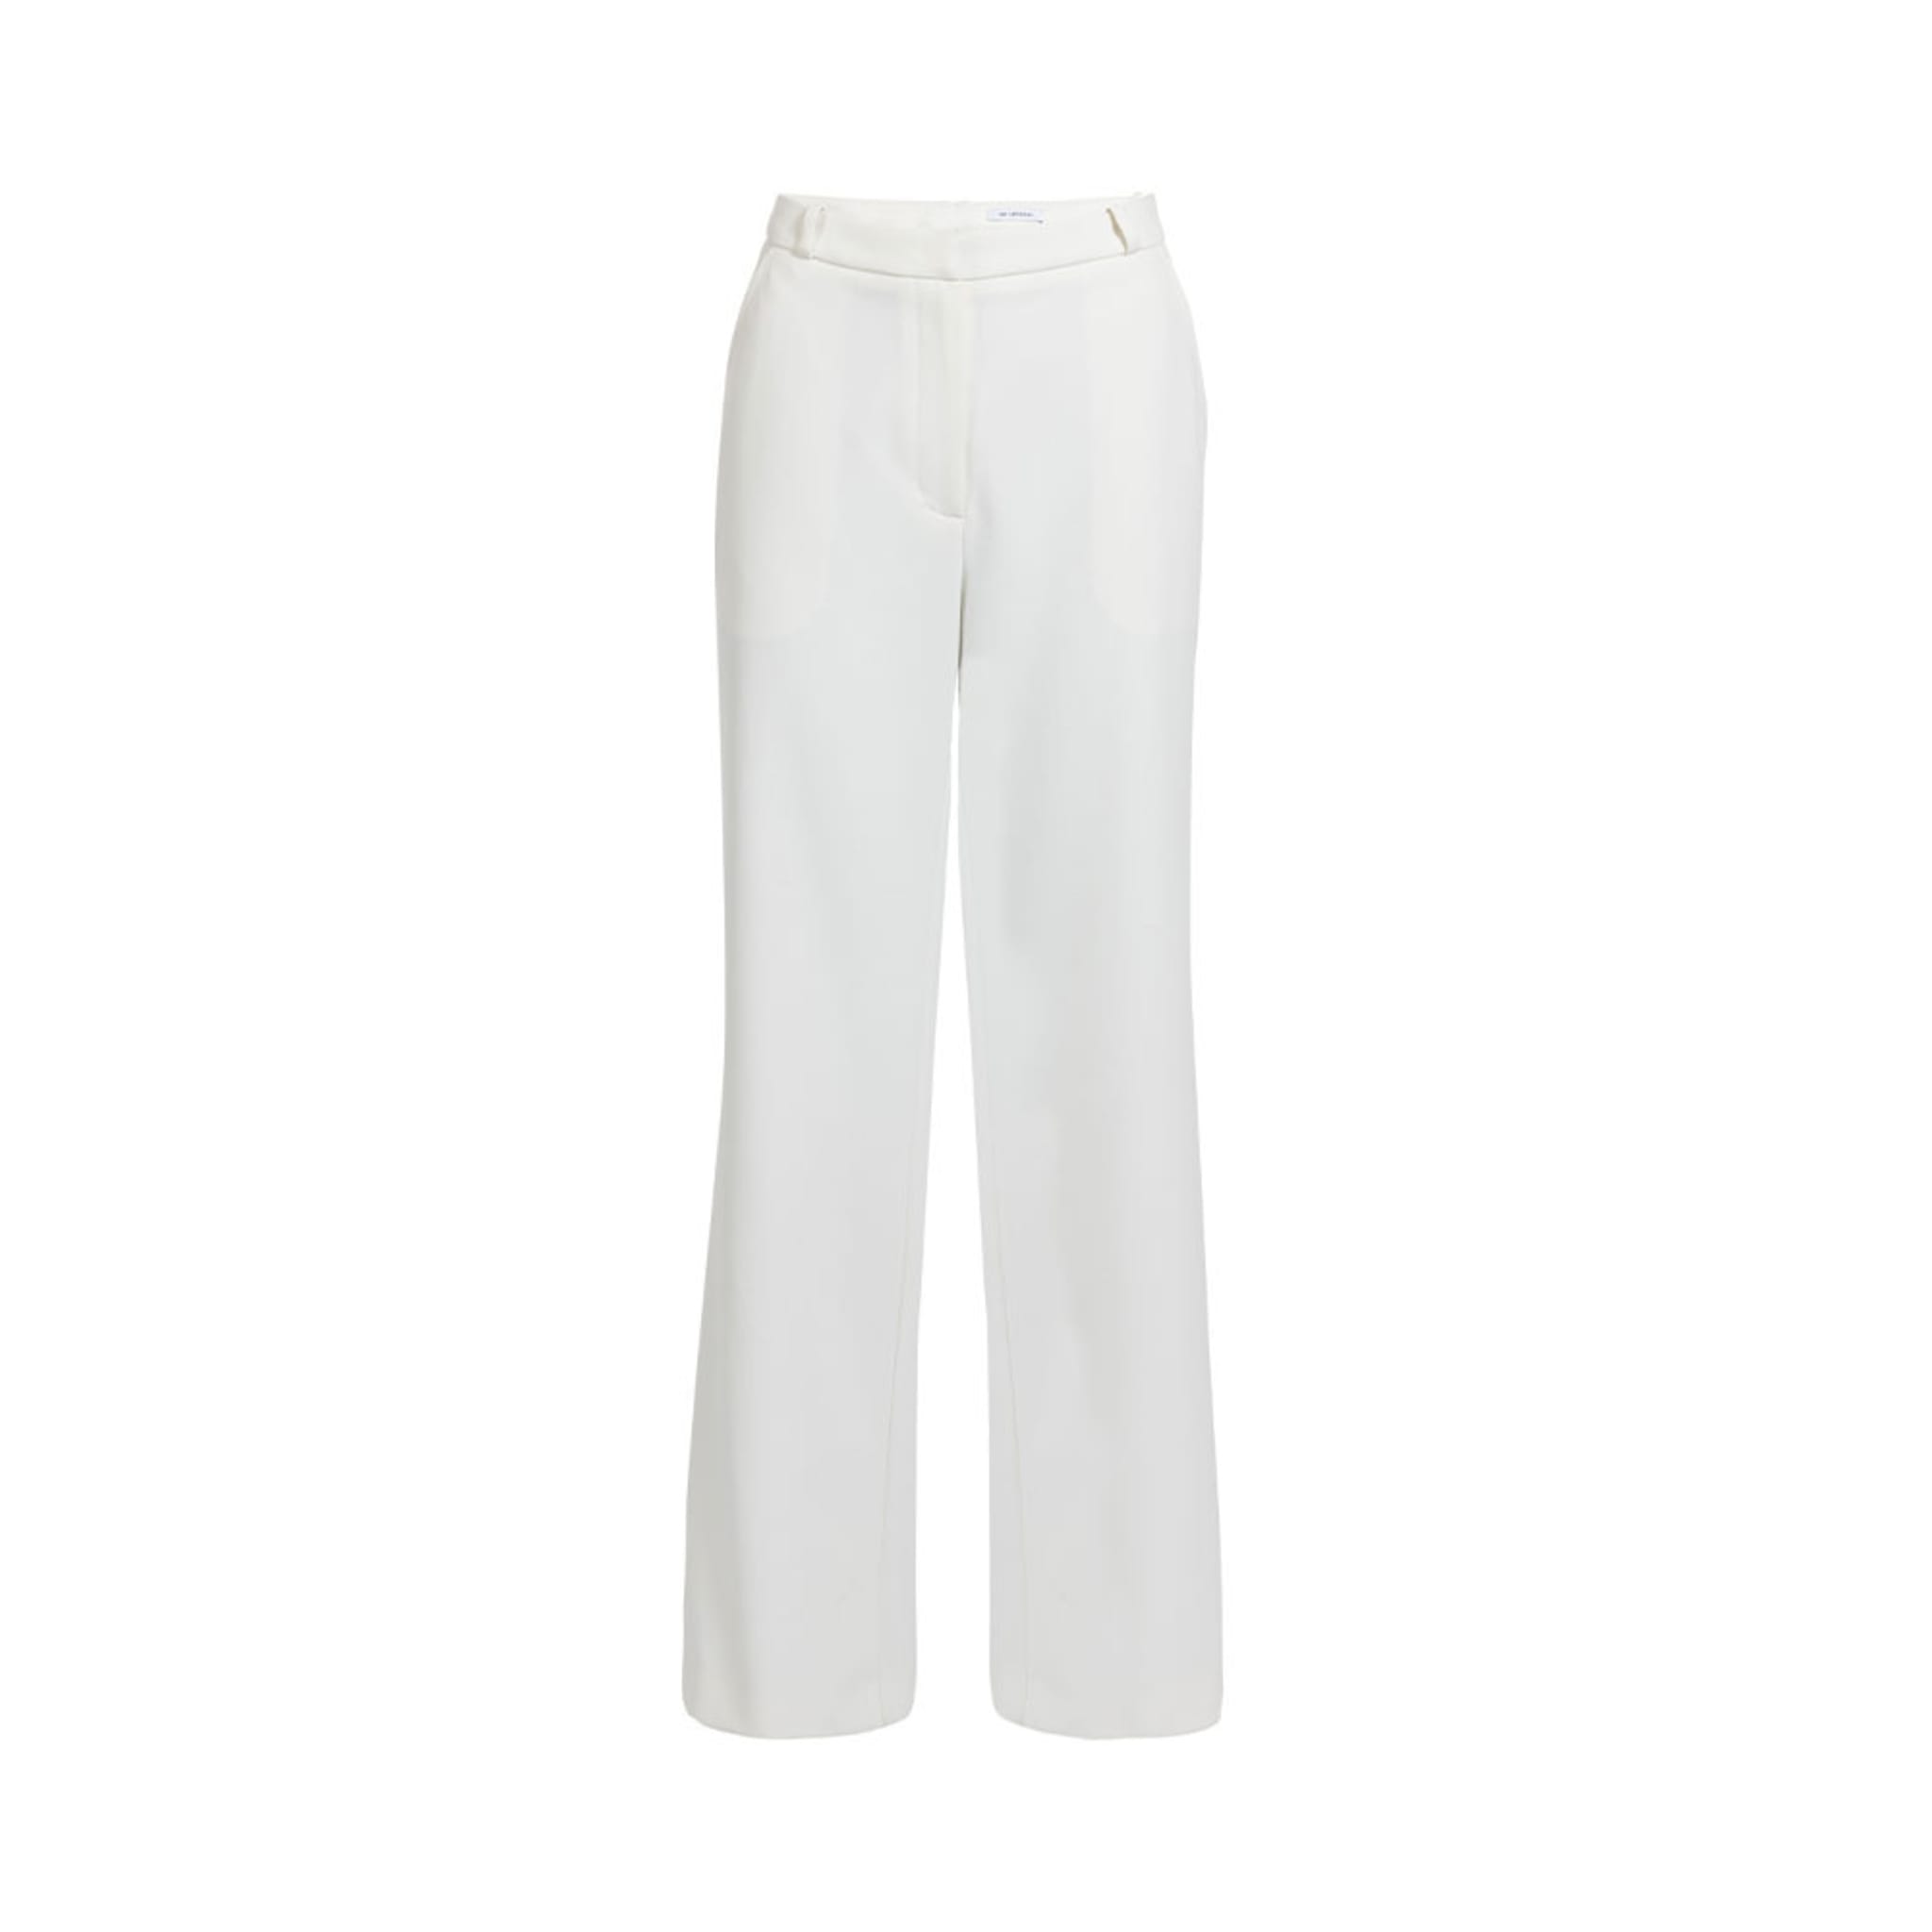 Brielle Trousers, Ivory